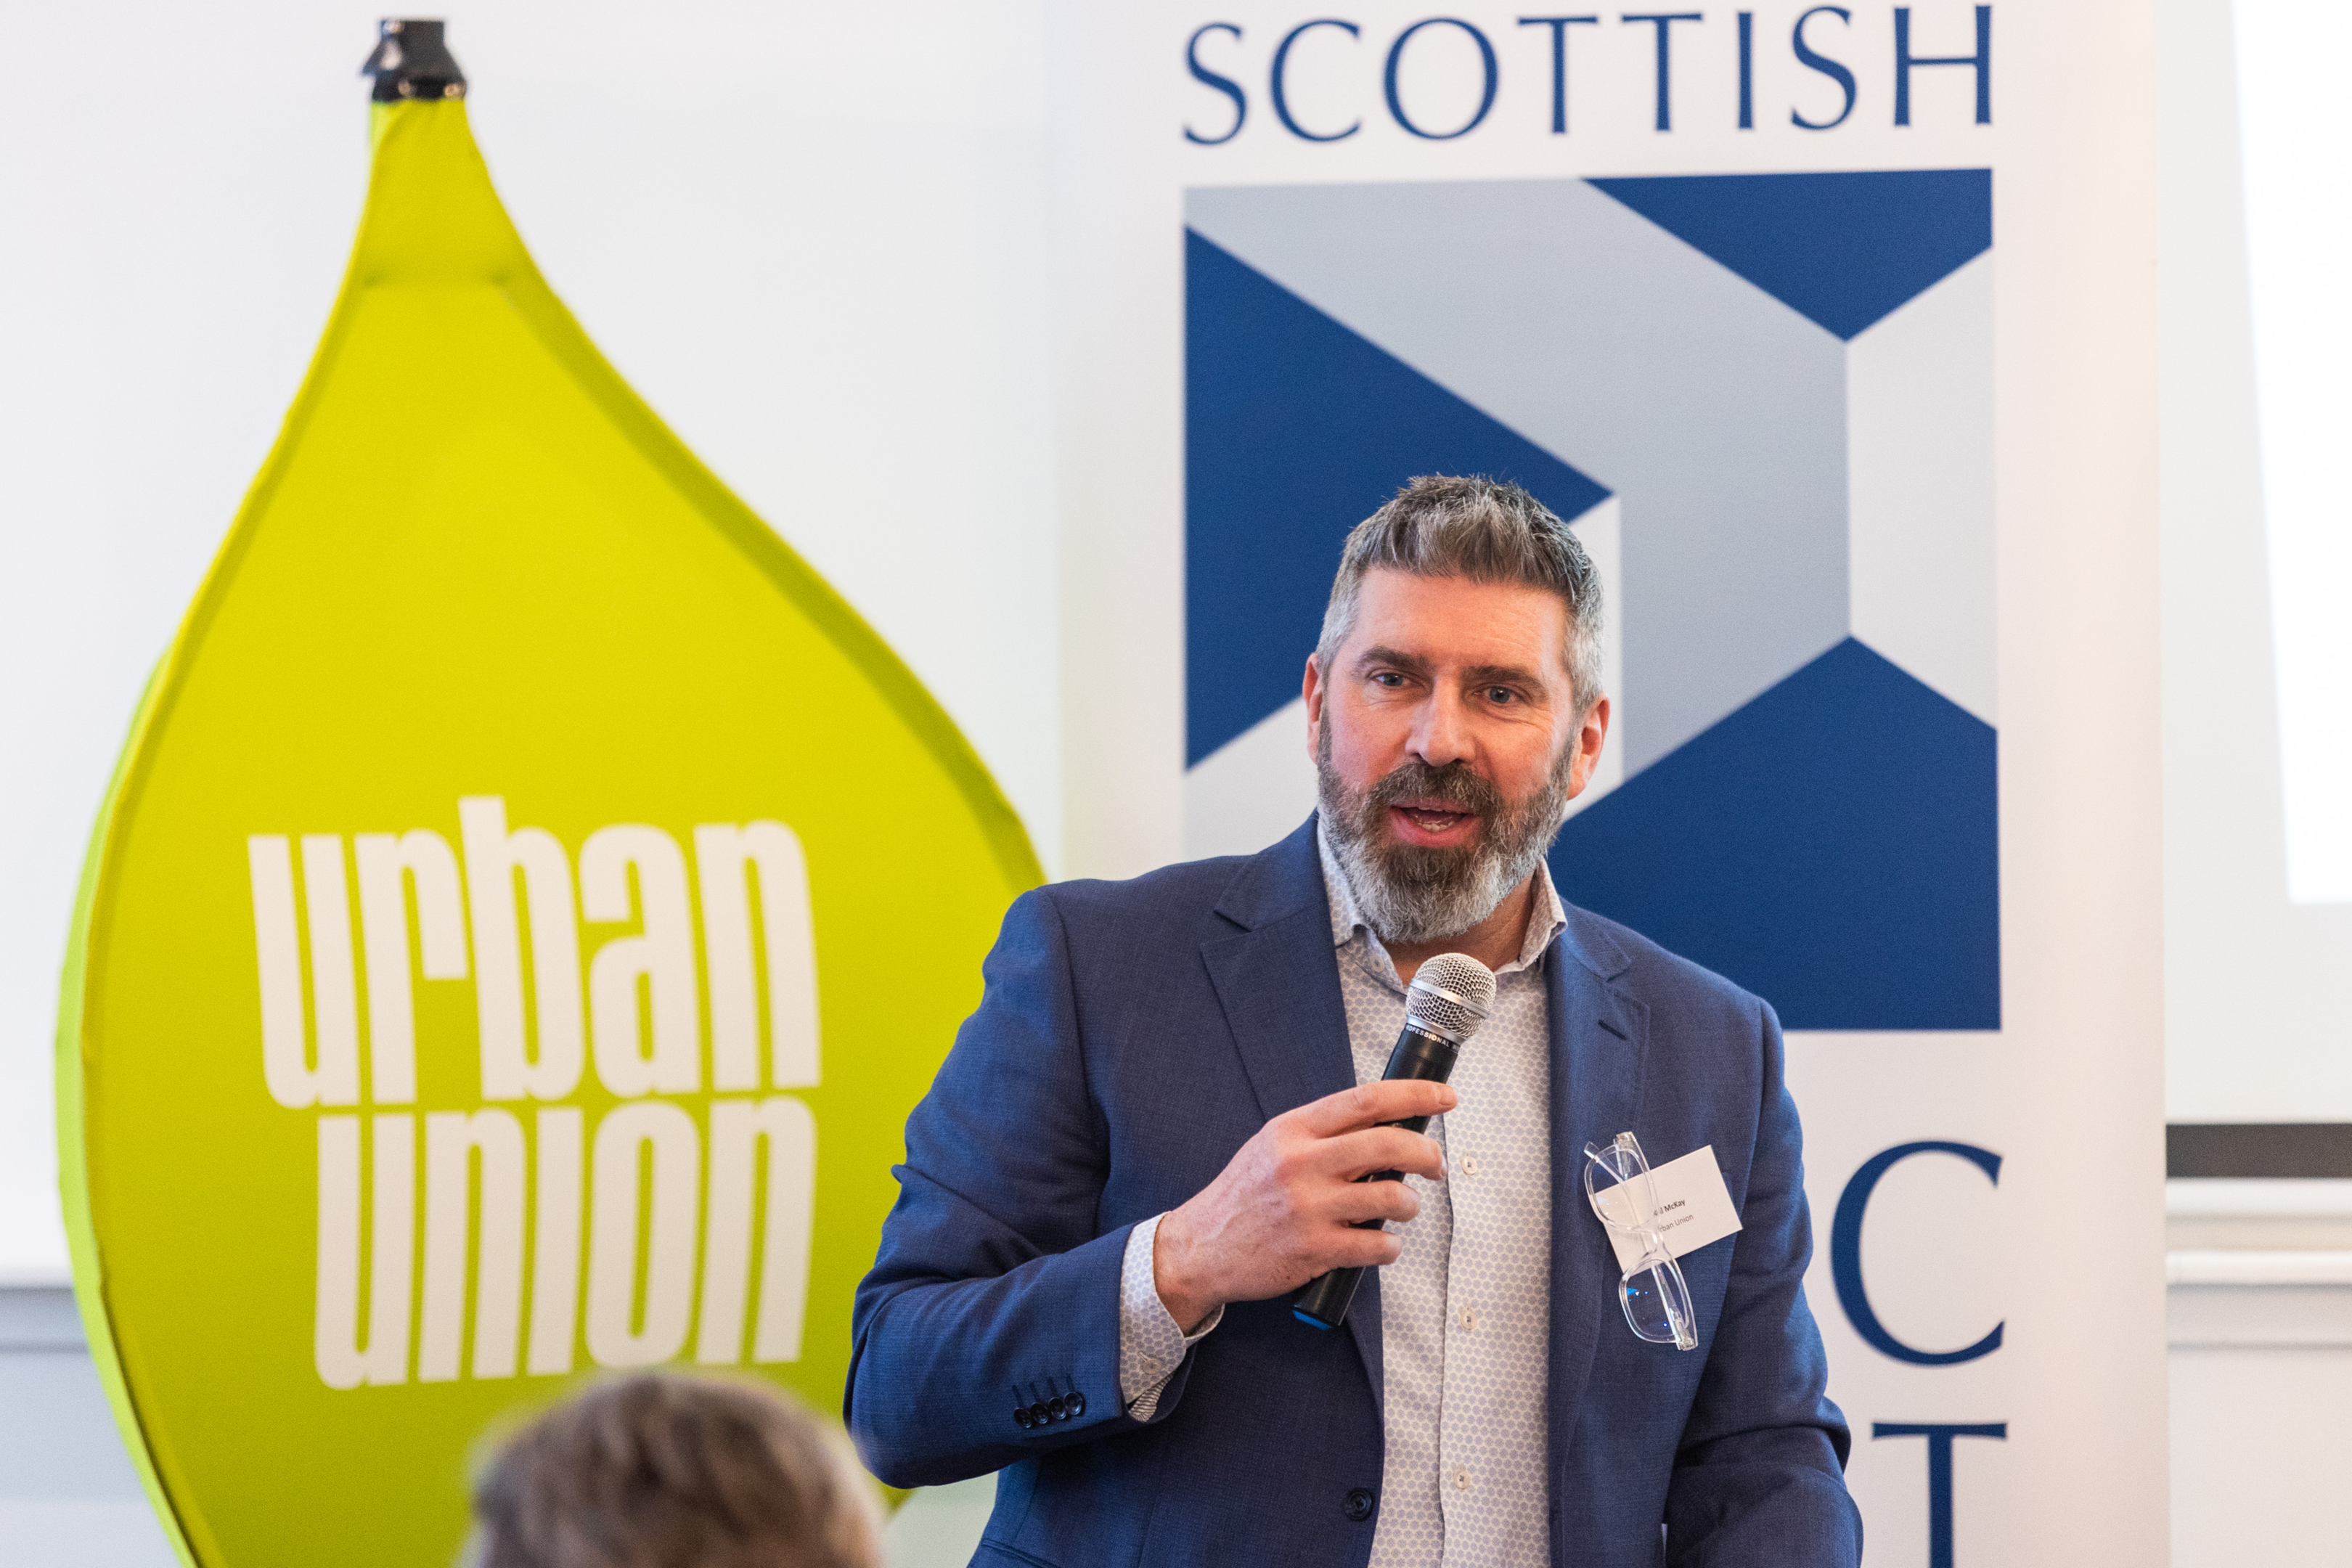 urban union support charitable organisation The Scottish Civic Trust for second year